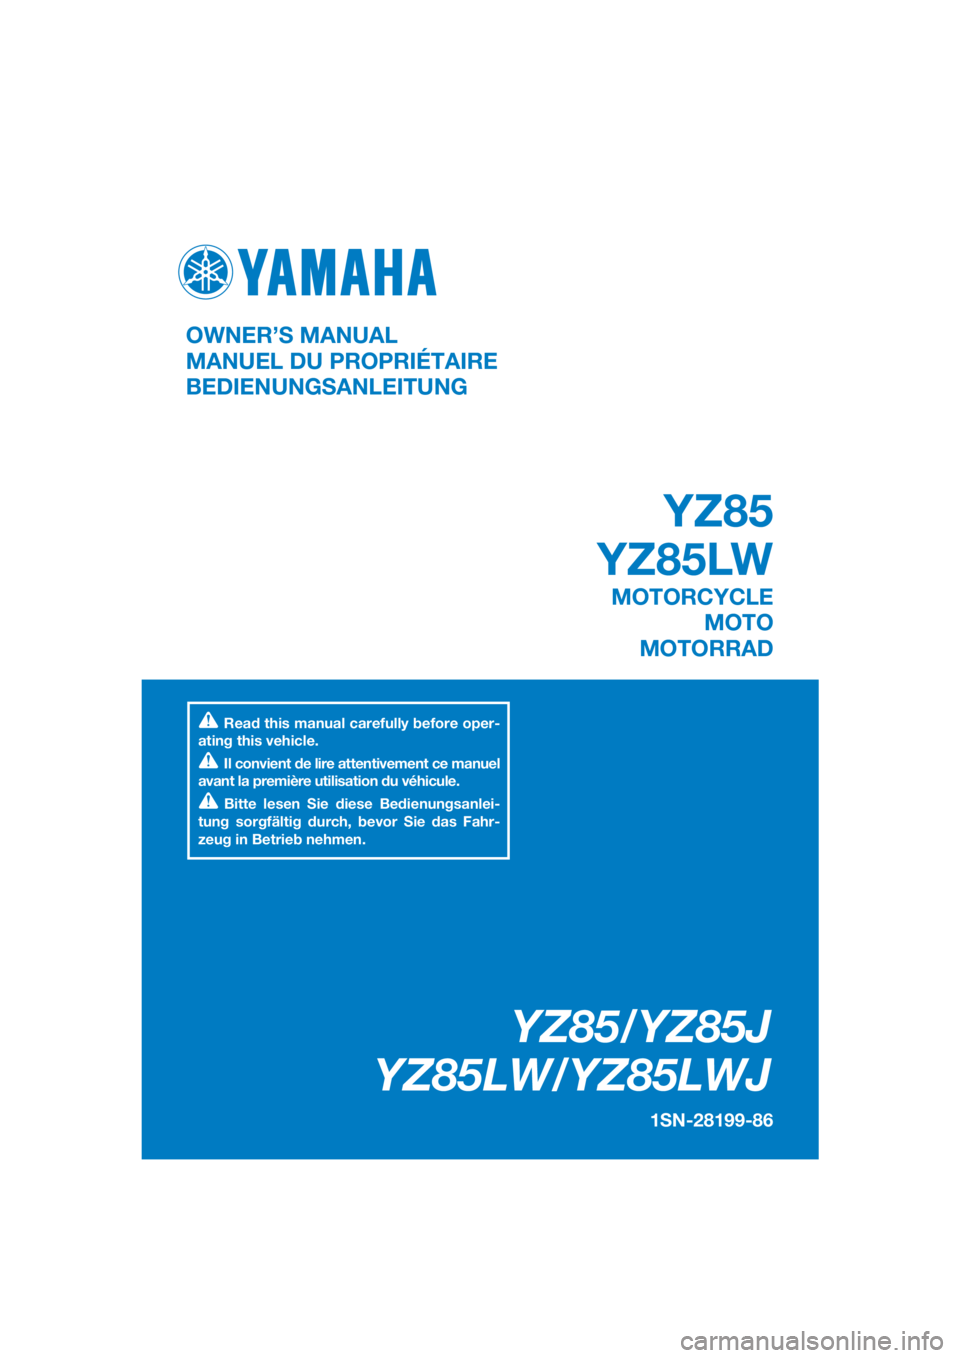 YAMAHA YZ85 2018  Owners Manual DIC183
YZ85/YZ85J
YZ85LW/YZ85LWJ
1SN-28199-86
OWNER’S MANUAL
MANUEL DU PROPRIÉTAIRE
BEDIENUNGSANLEITUNG
Read this manual carefully before oper-
ating this vehicle.
Il convient de lire attentivement